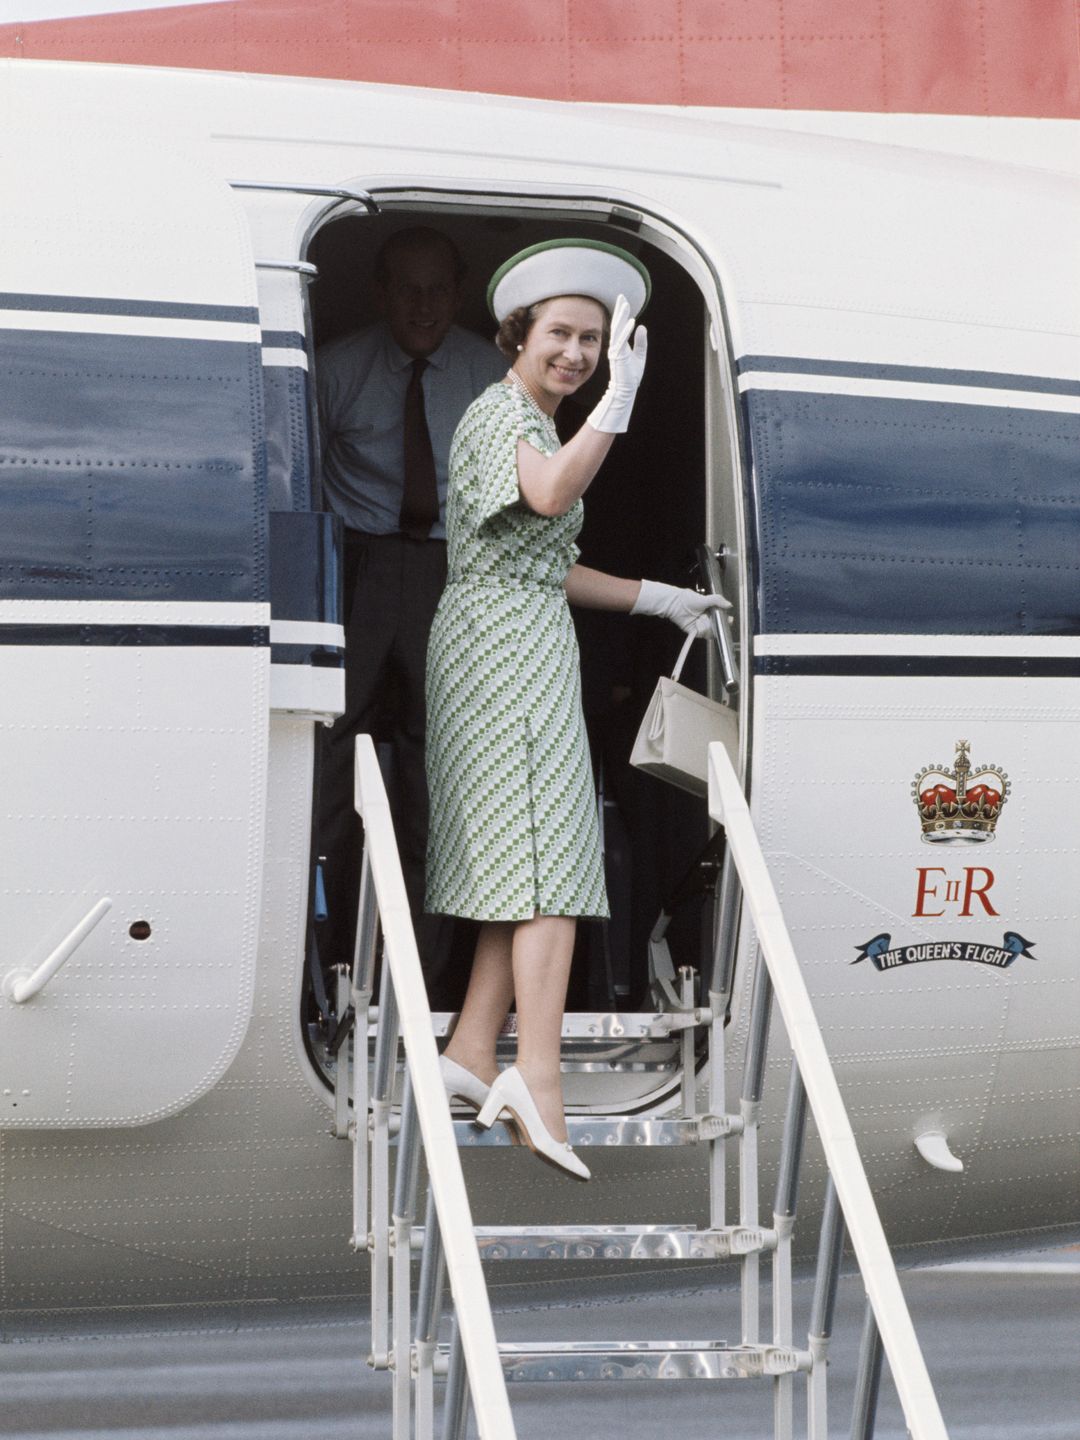 queen getting onto plane 